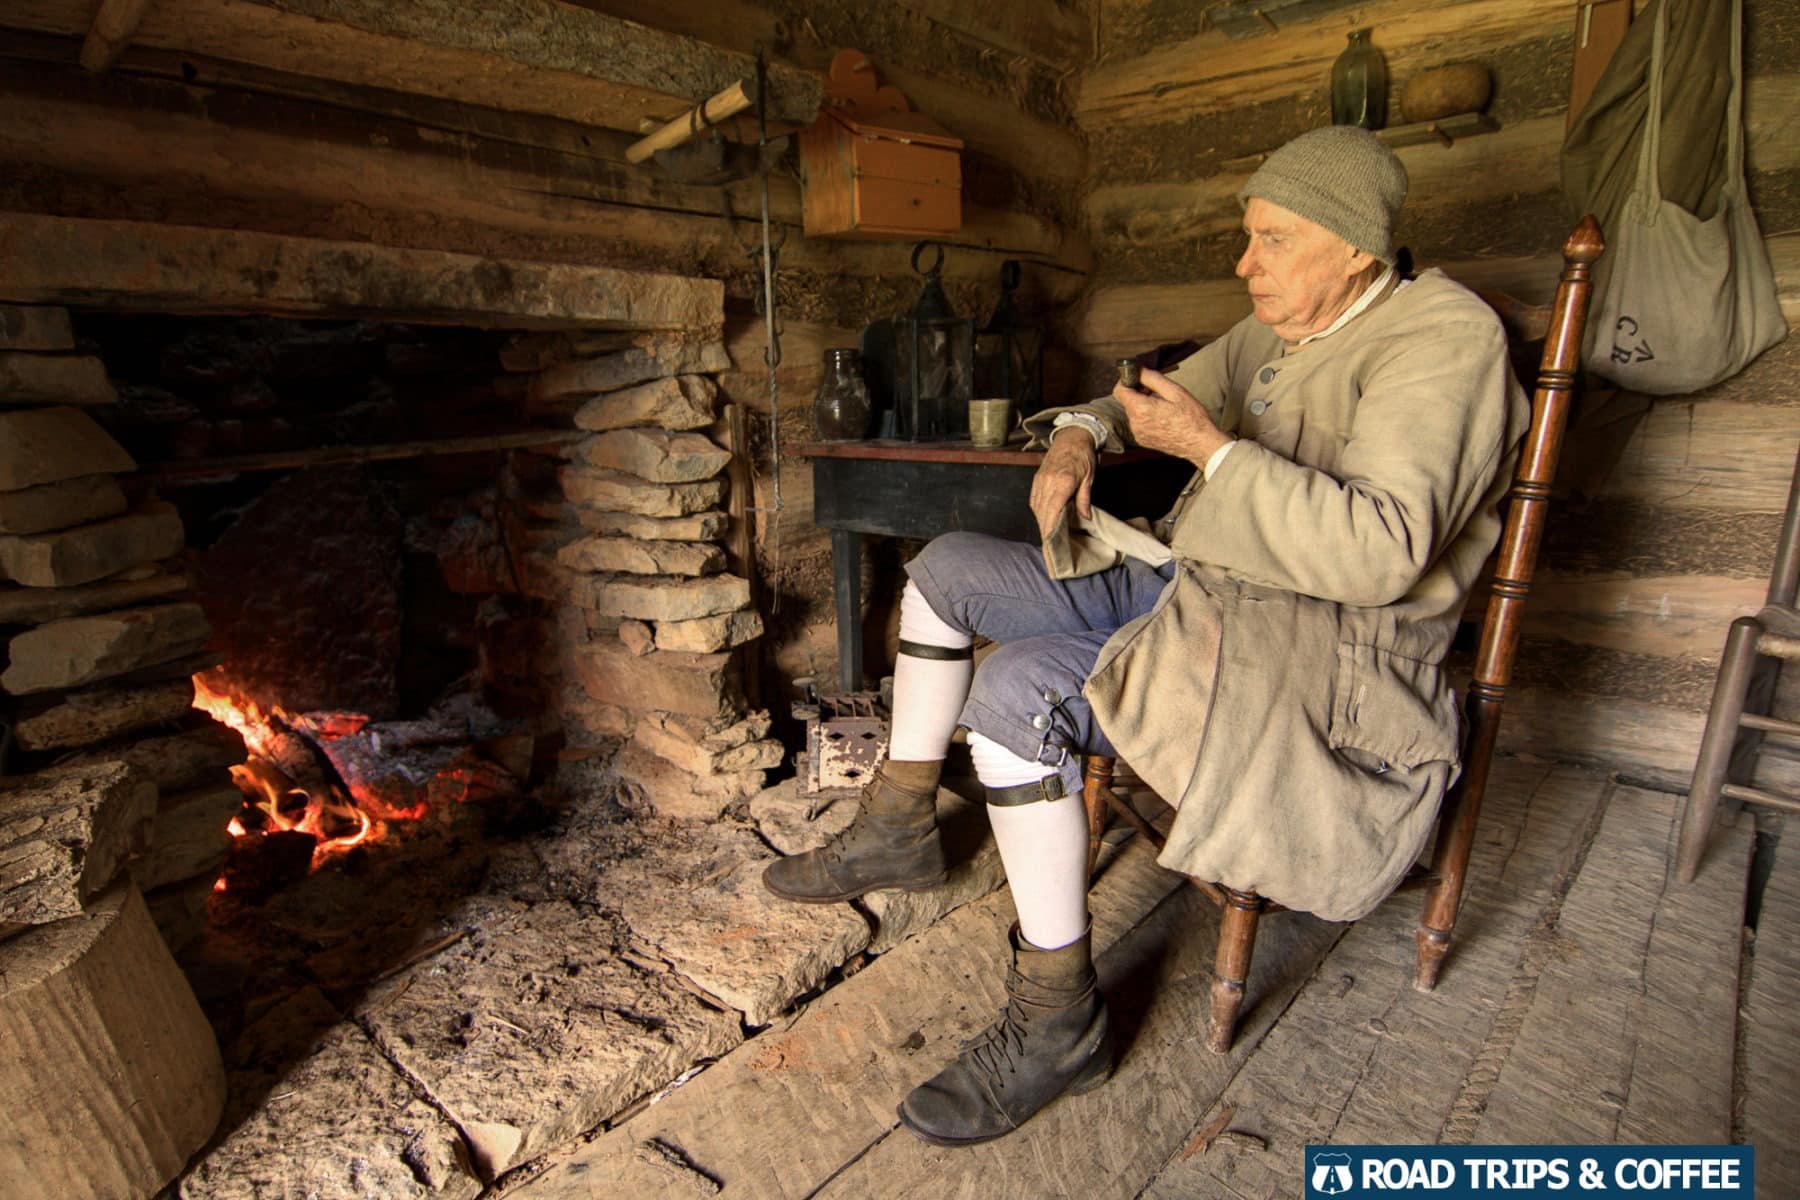 A reenactor dressed in 1700s clothing sitting in front of a fireplace inside a cabin at Martin's Station at Wilderness Road State Park in Virginia